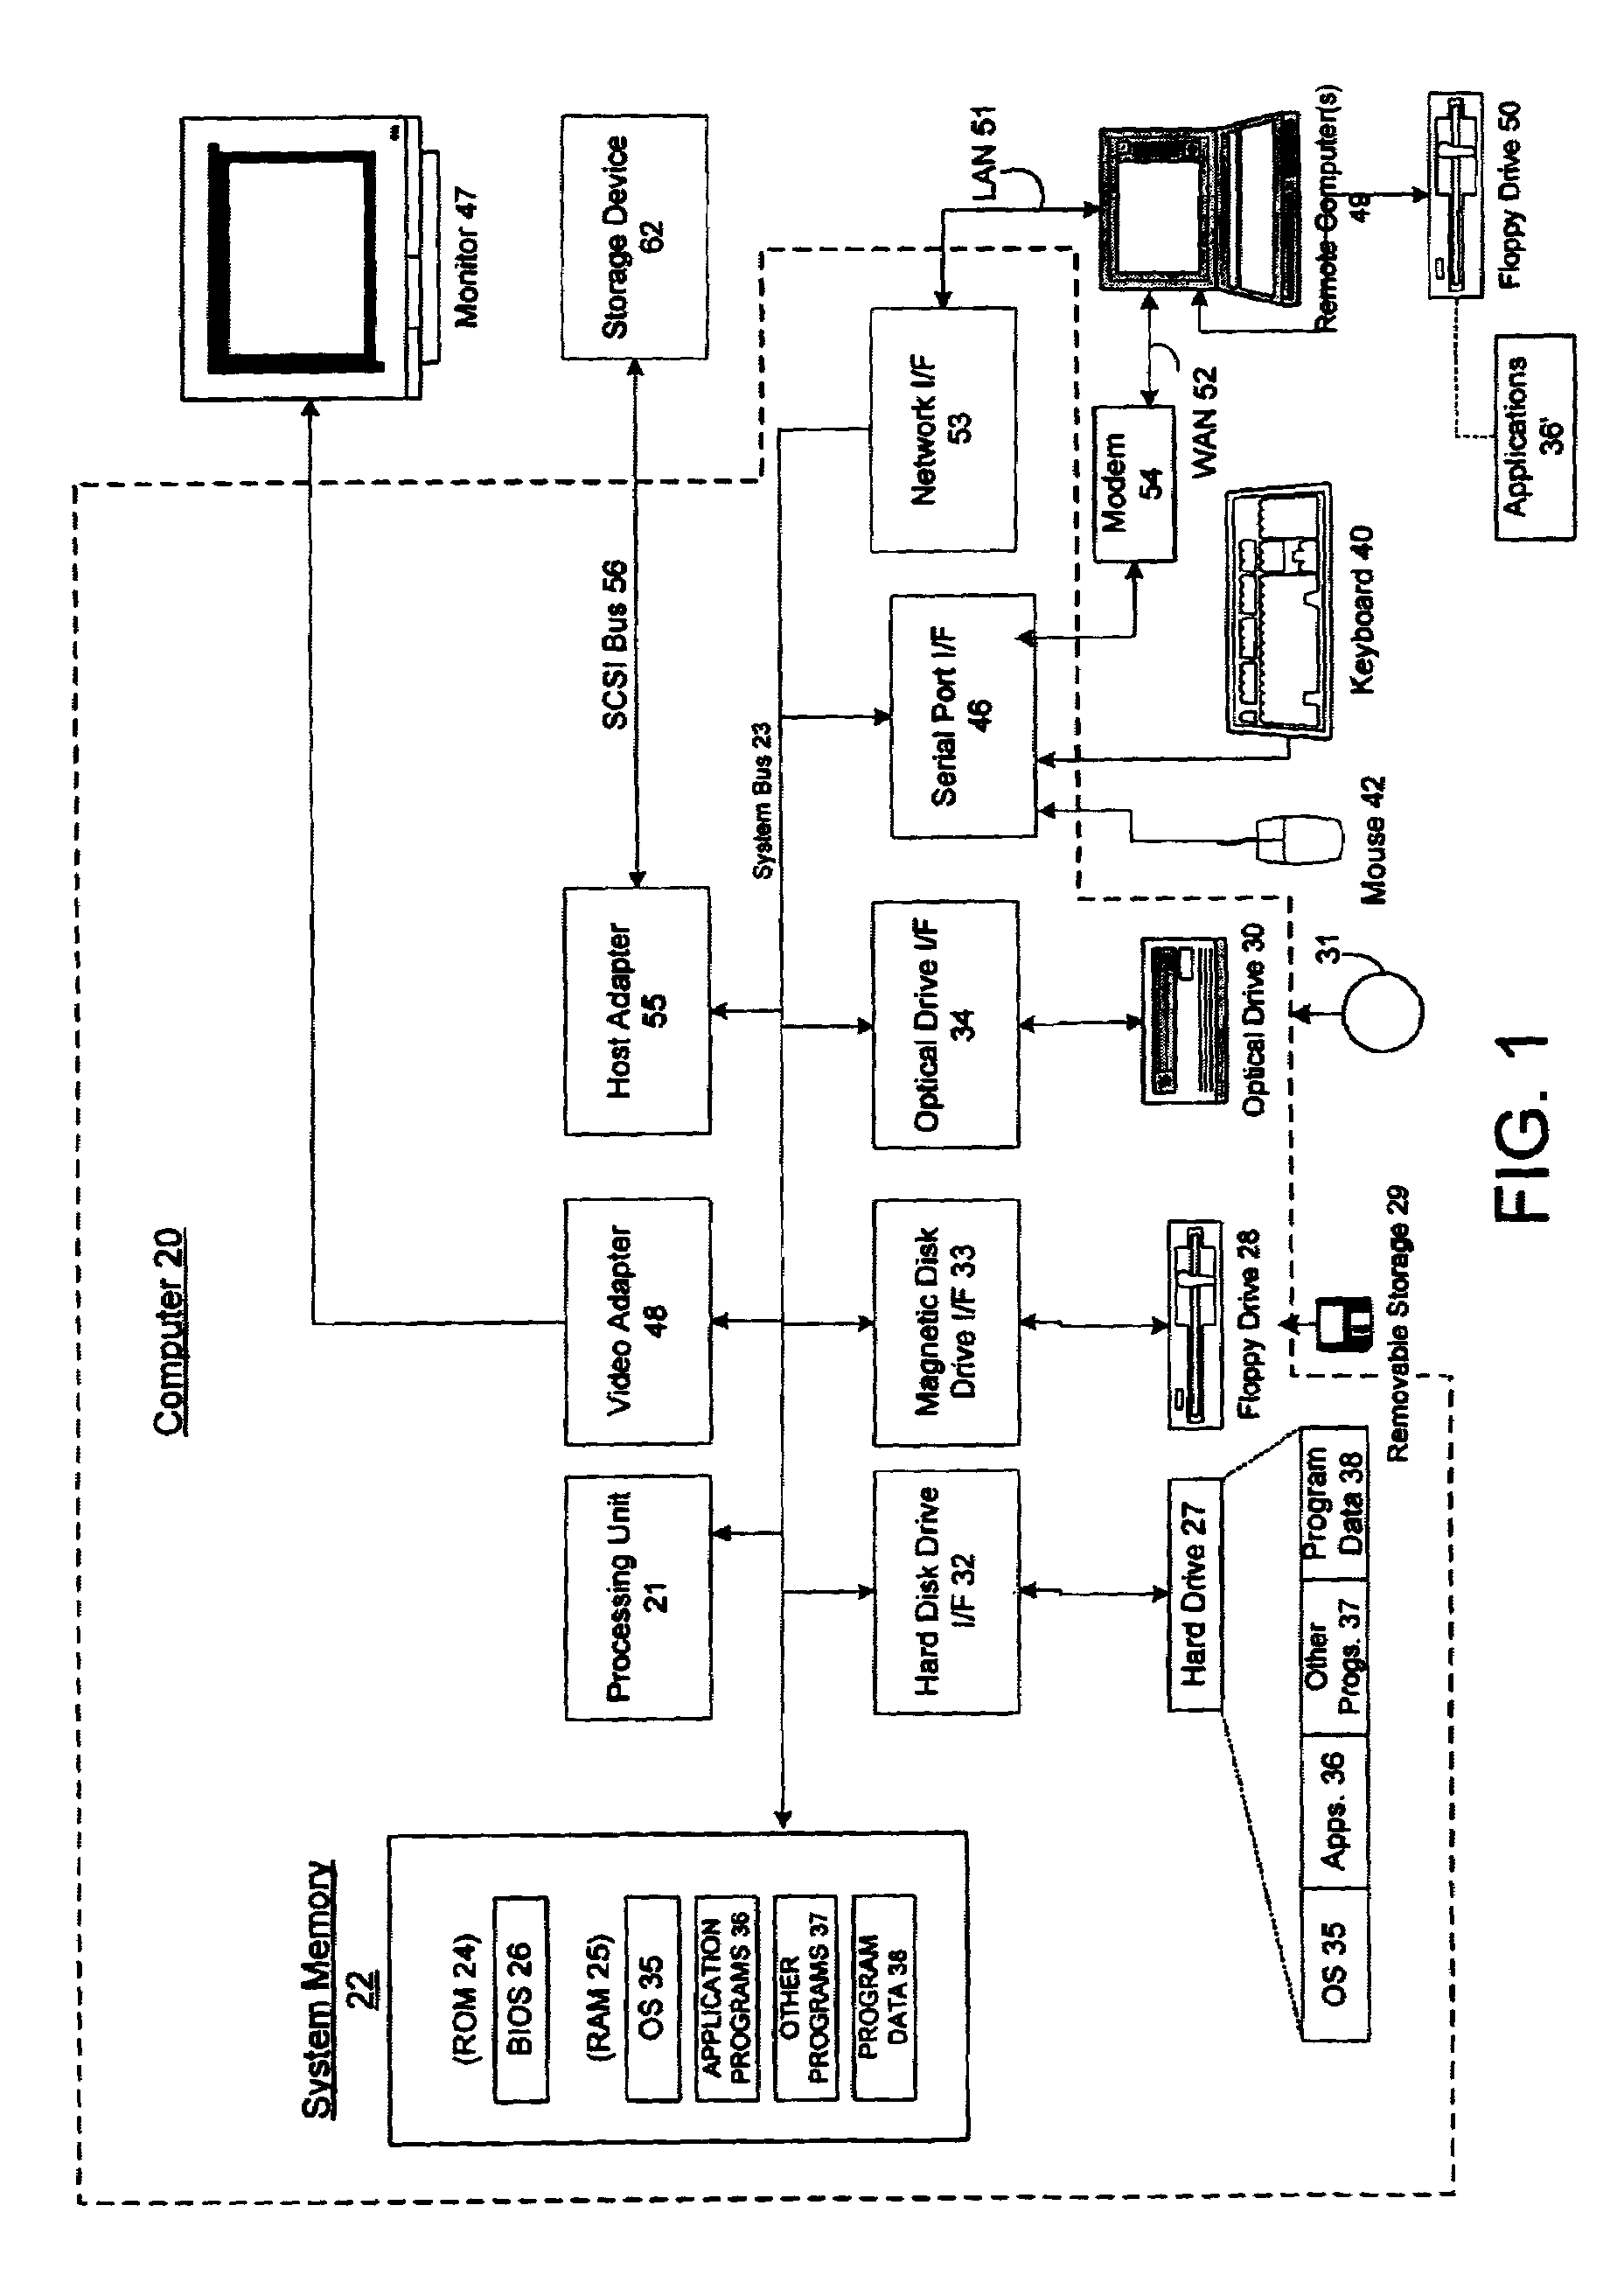 System and method for activating a rendering device in a multi-level rights-management architecture